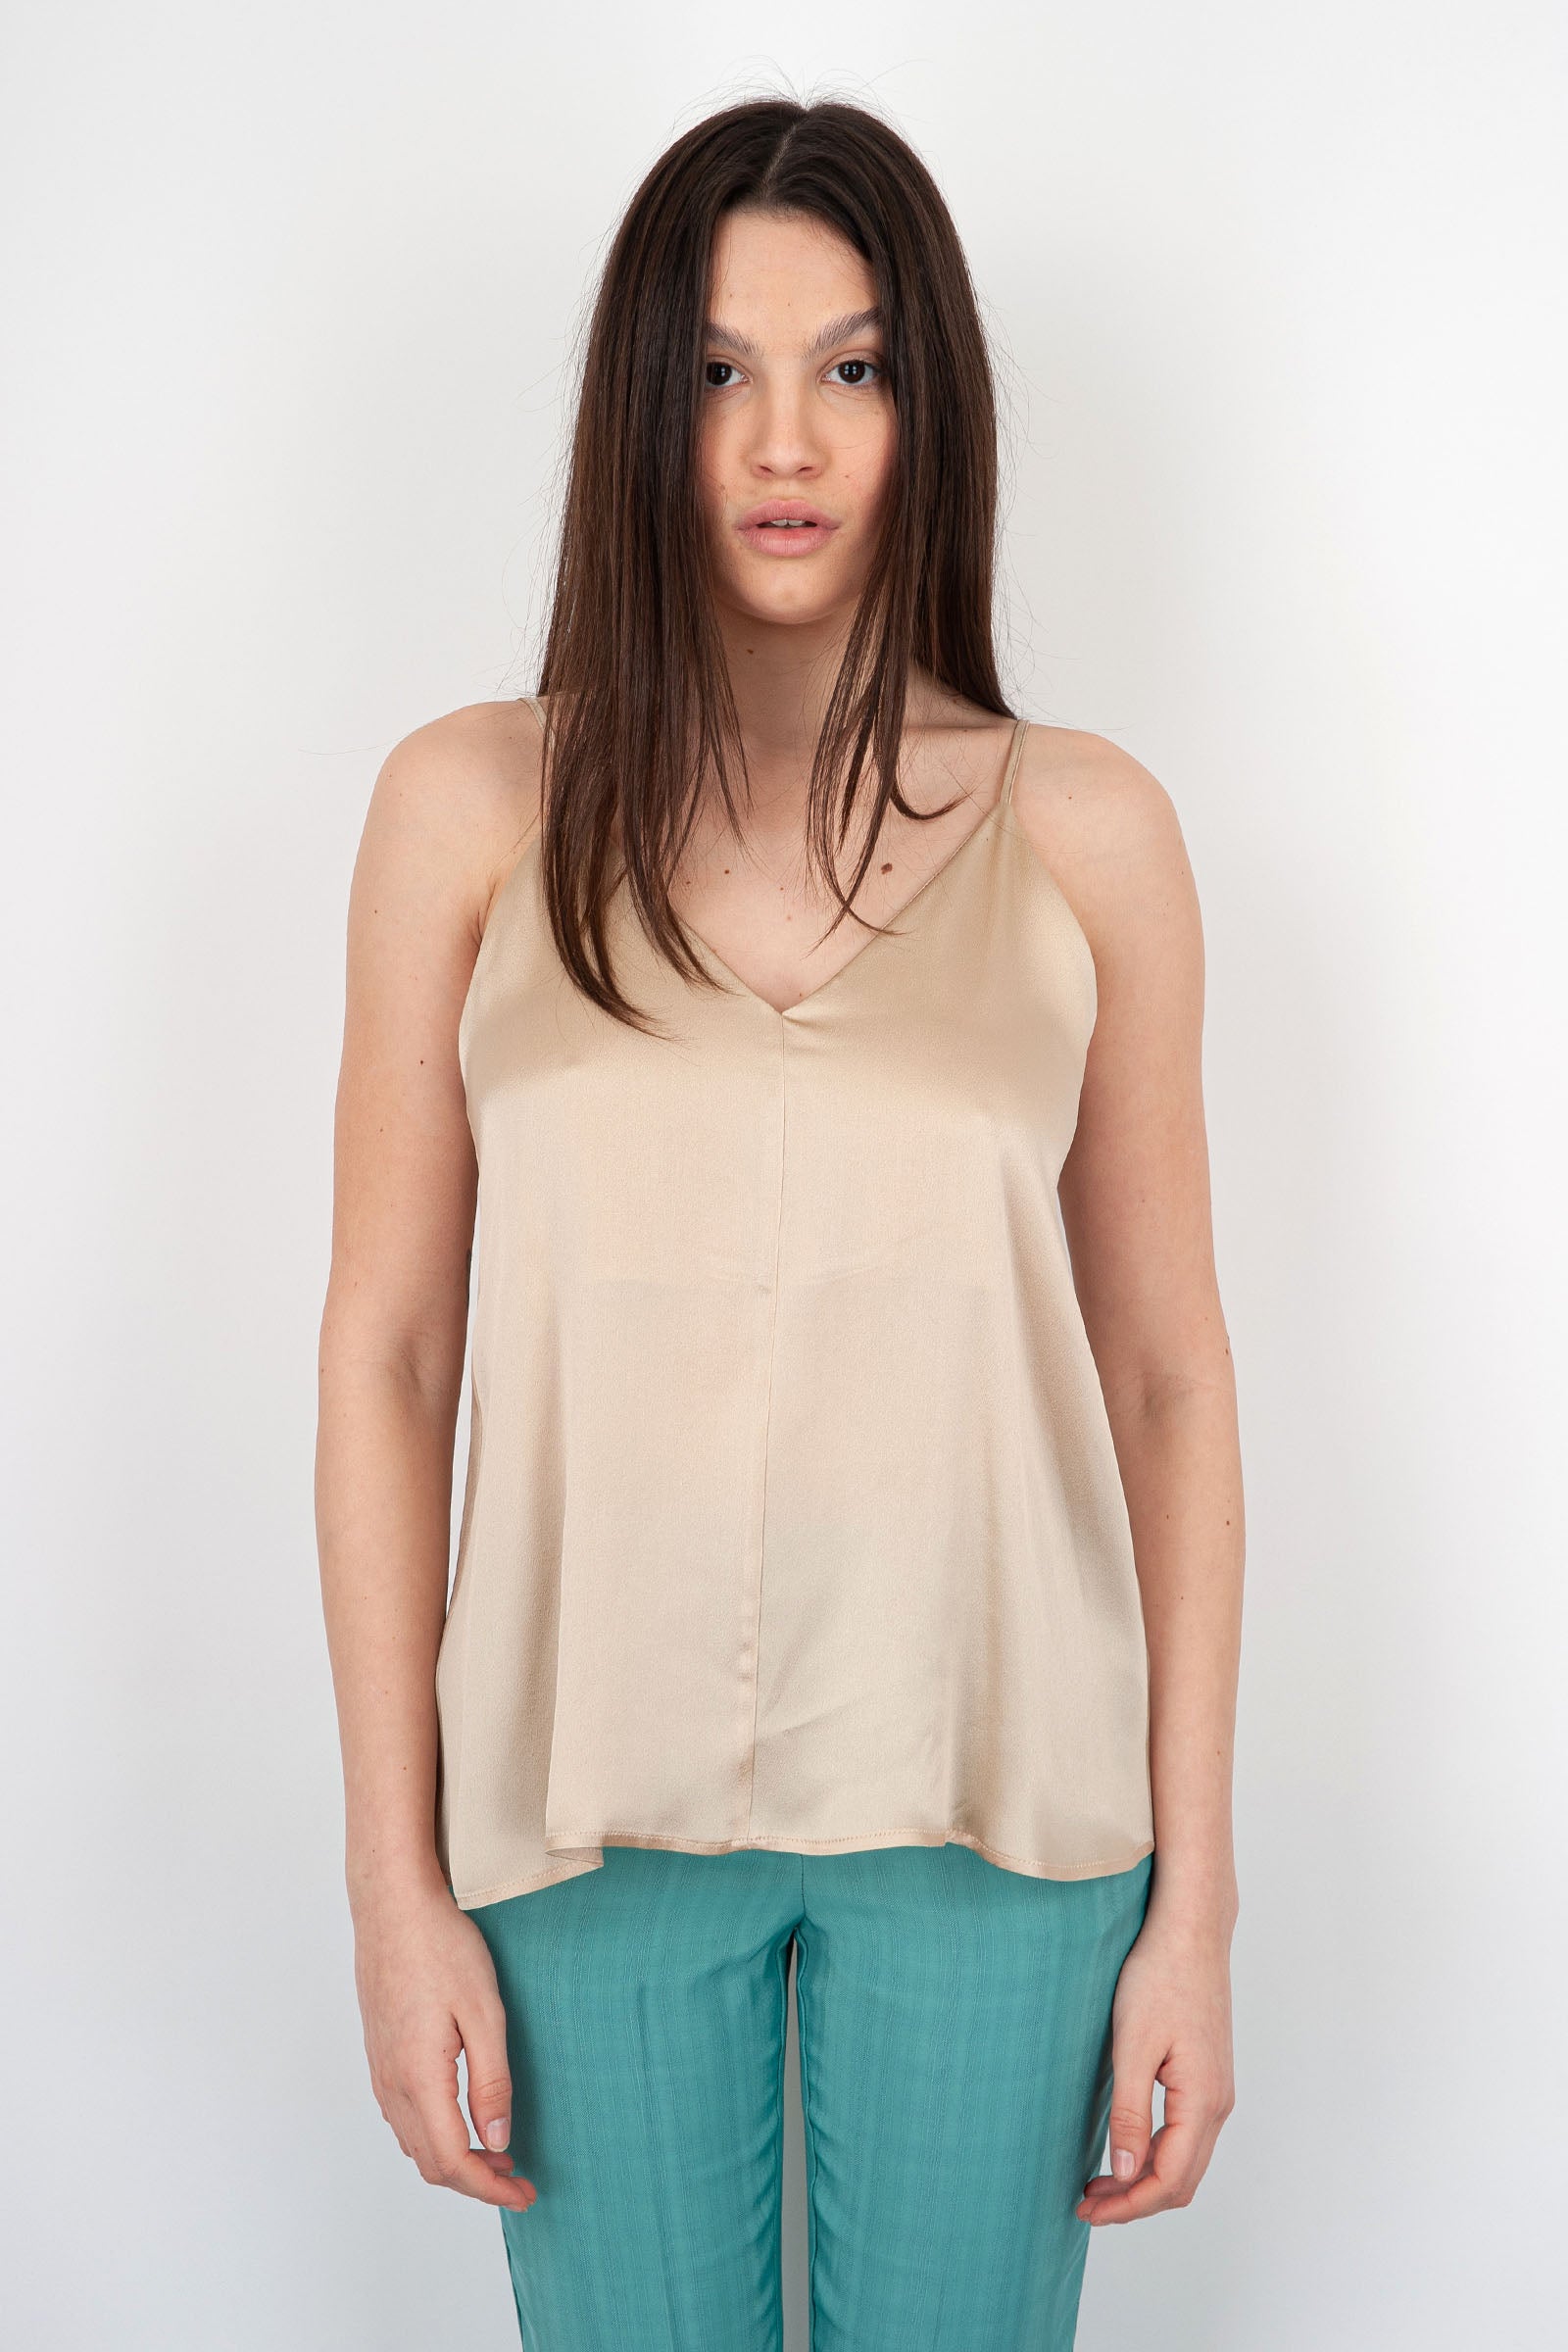 Semicouture Hanna Synthetic Top Camel - 1